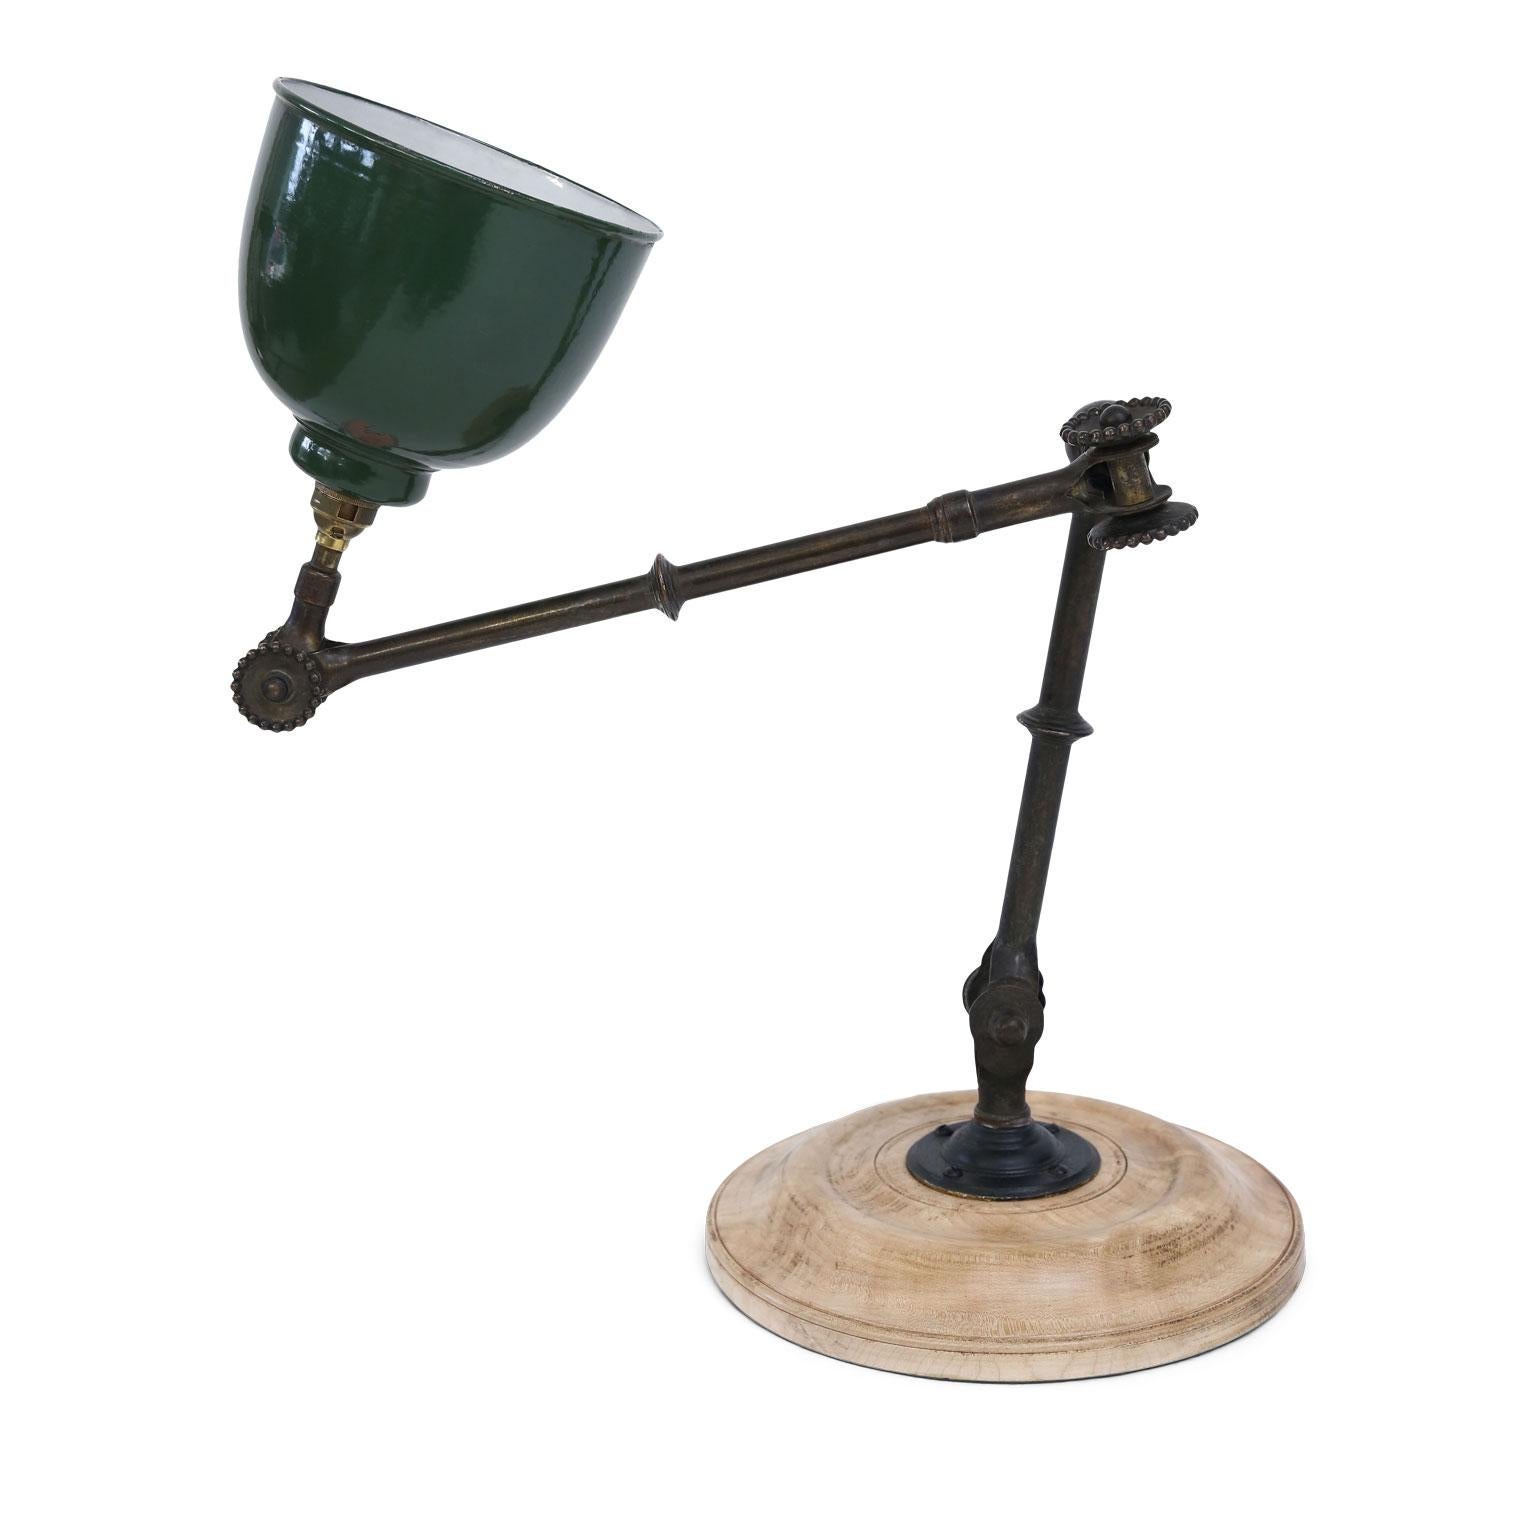 Large-scale Edwardian draftsman lamp (circa 1900-1915) of English origin that is almost industrial in style. Its articulated arm features adjustable knuckle joints and an original green enameled shade. Stands upon its original turned sycamore base.